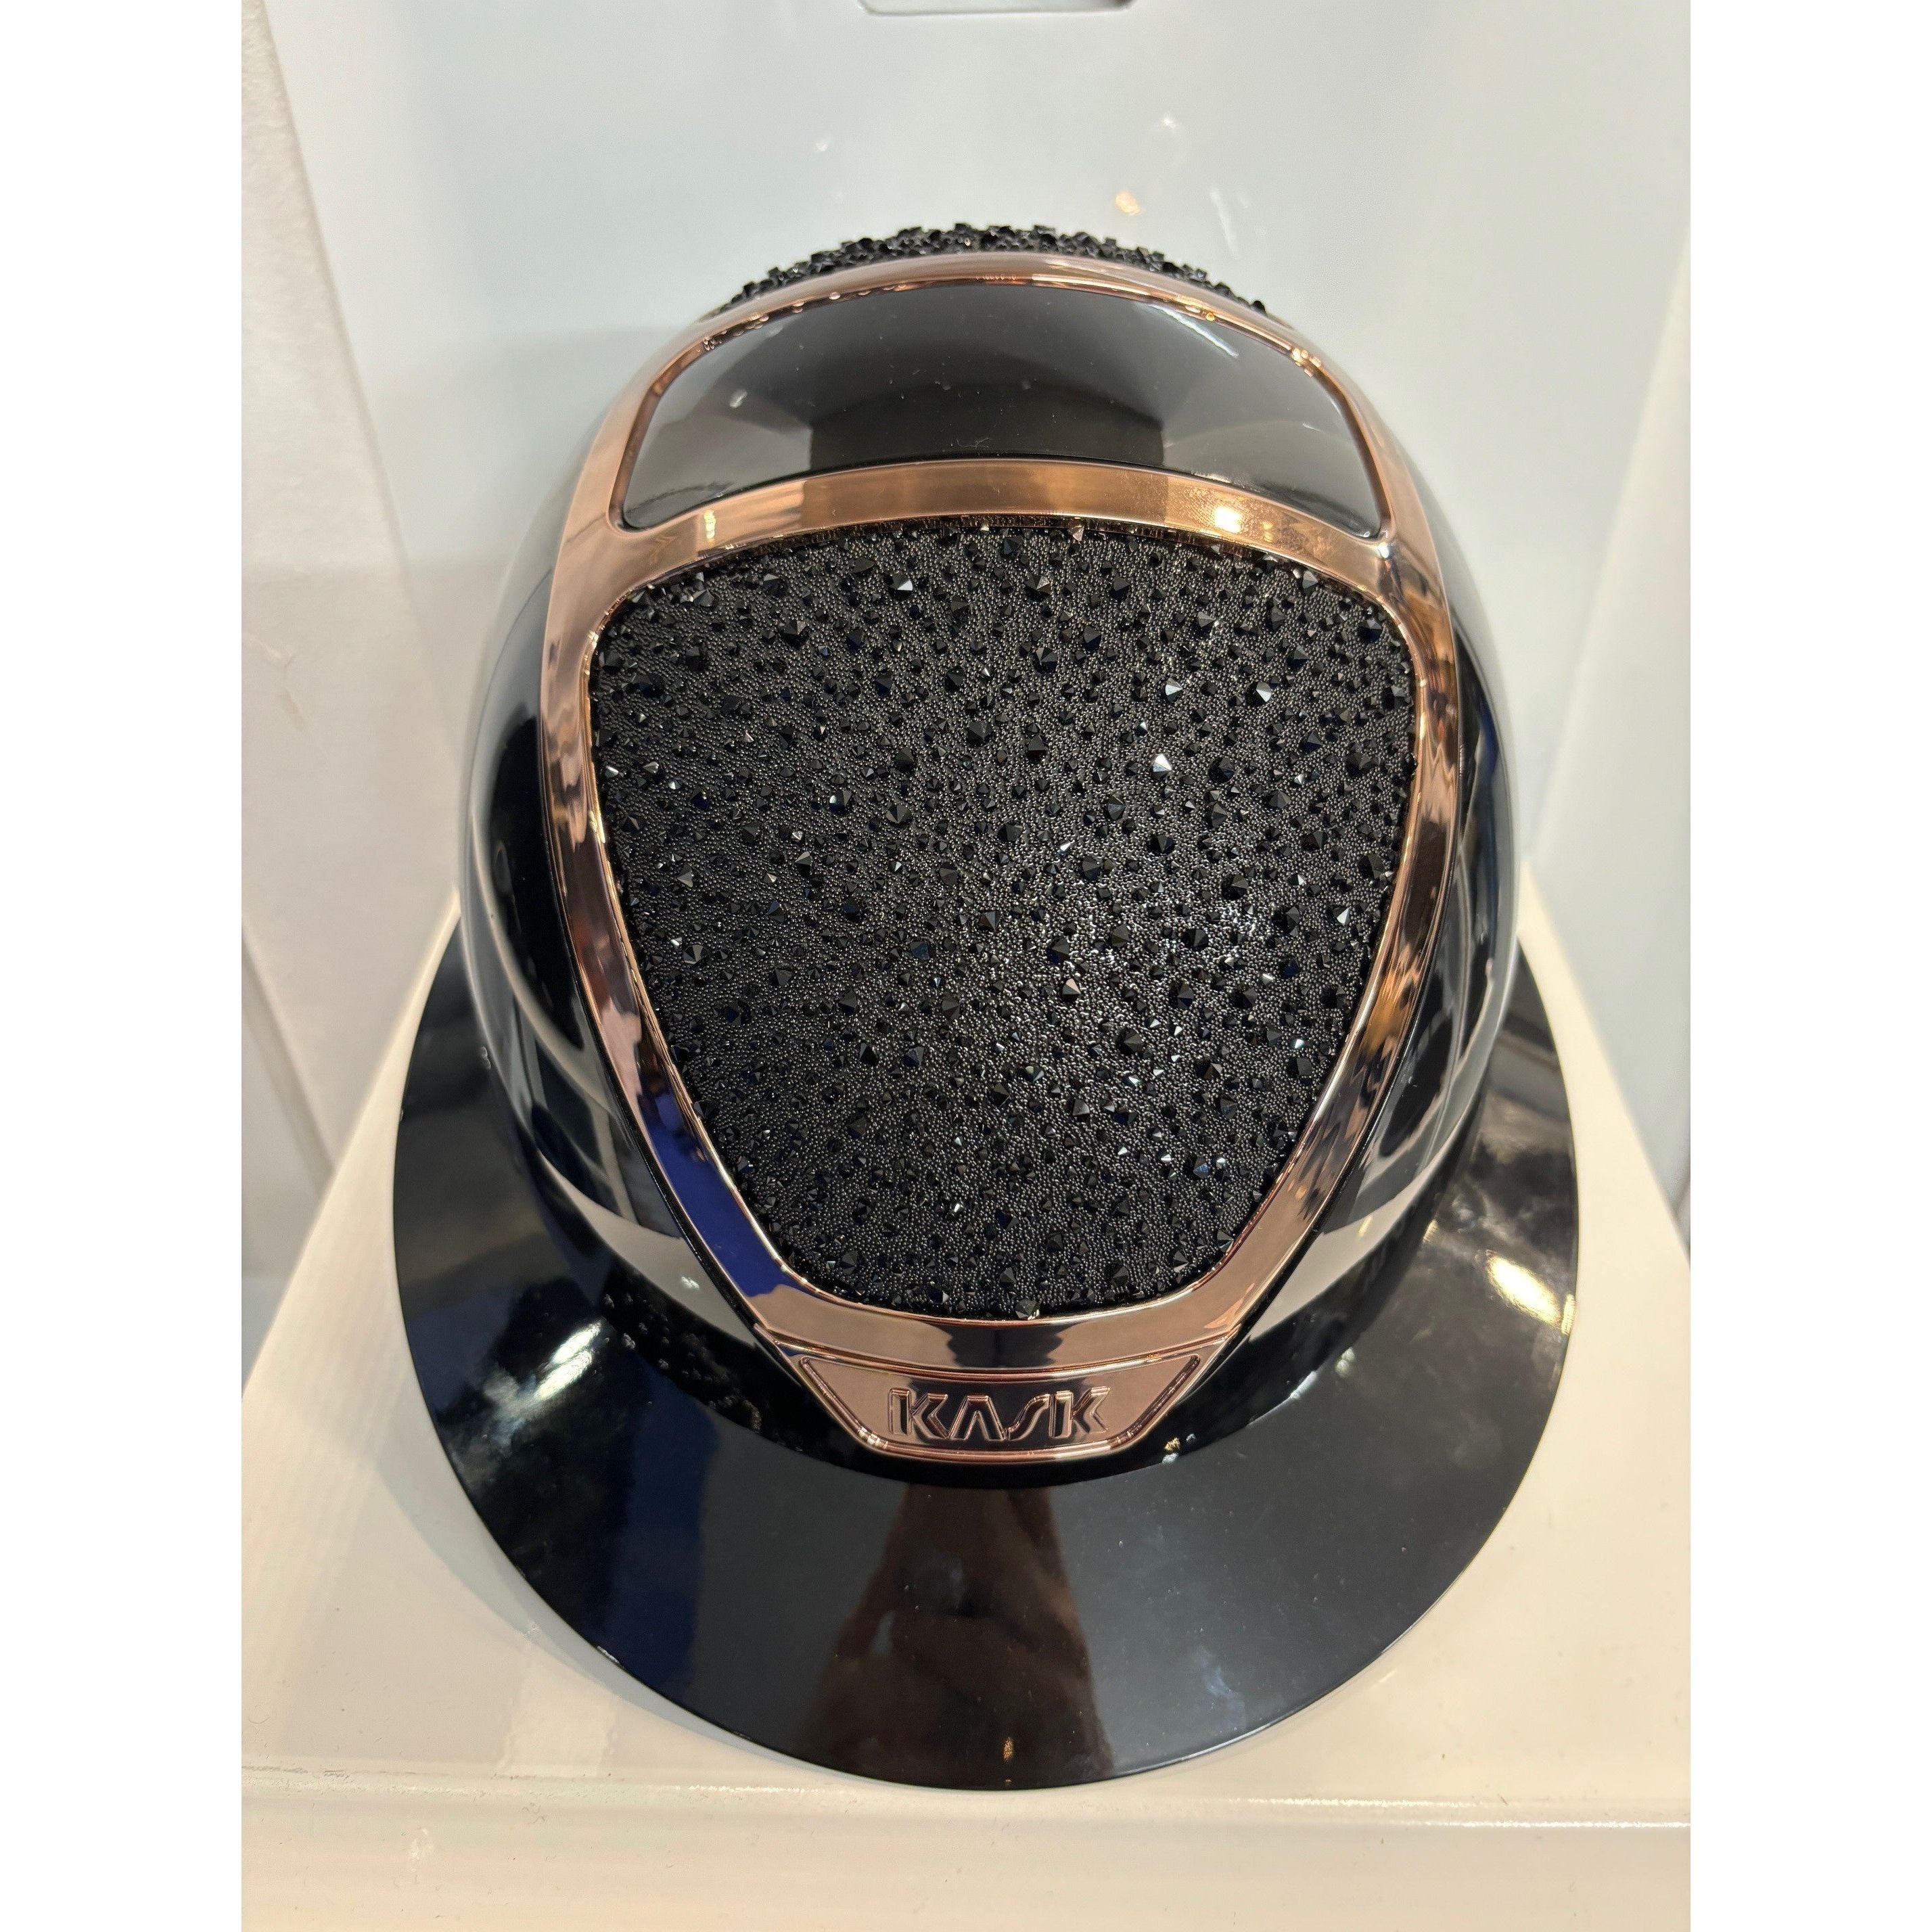 KASK On the Rocks Glossy Black Star Lady 2021 Harness- in stock and ready to ship